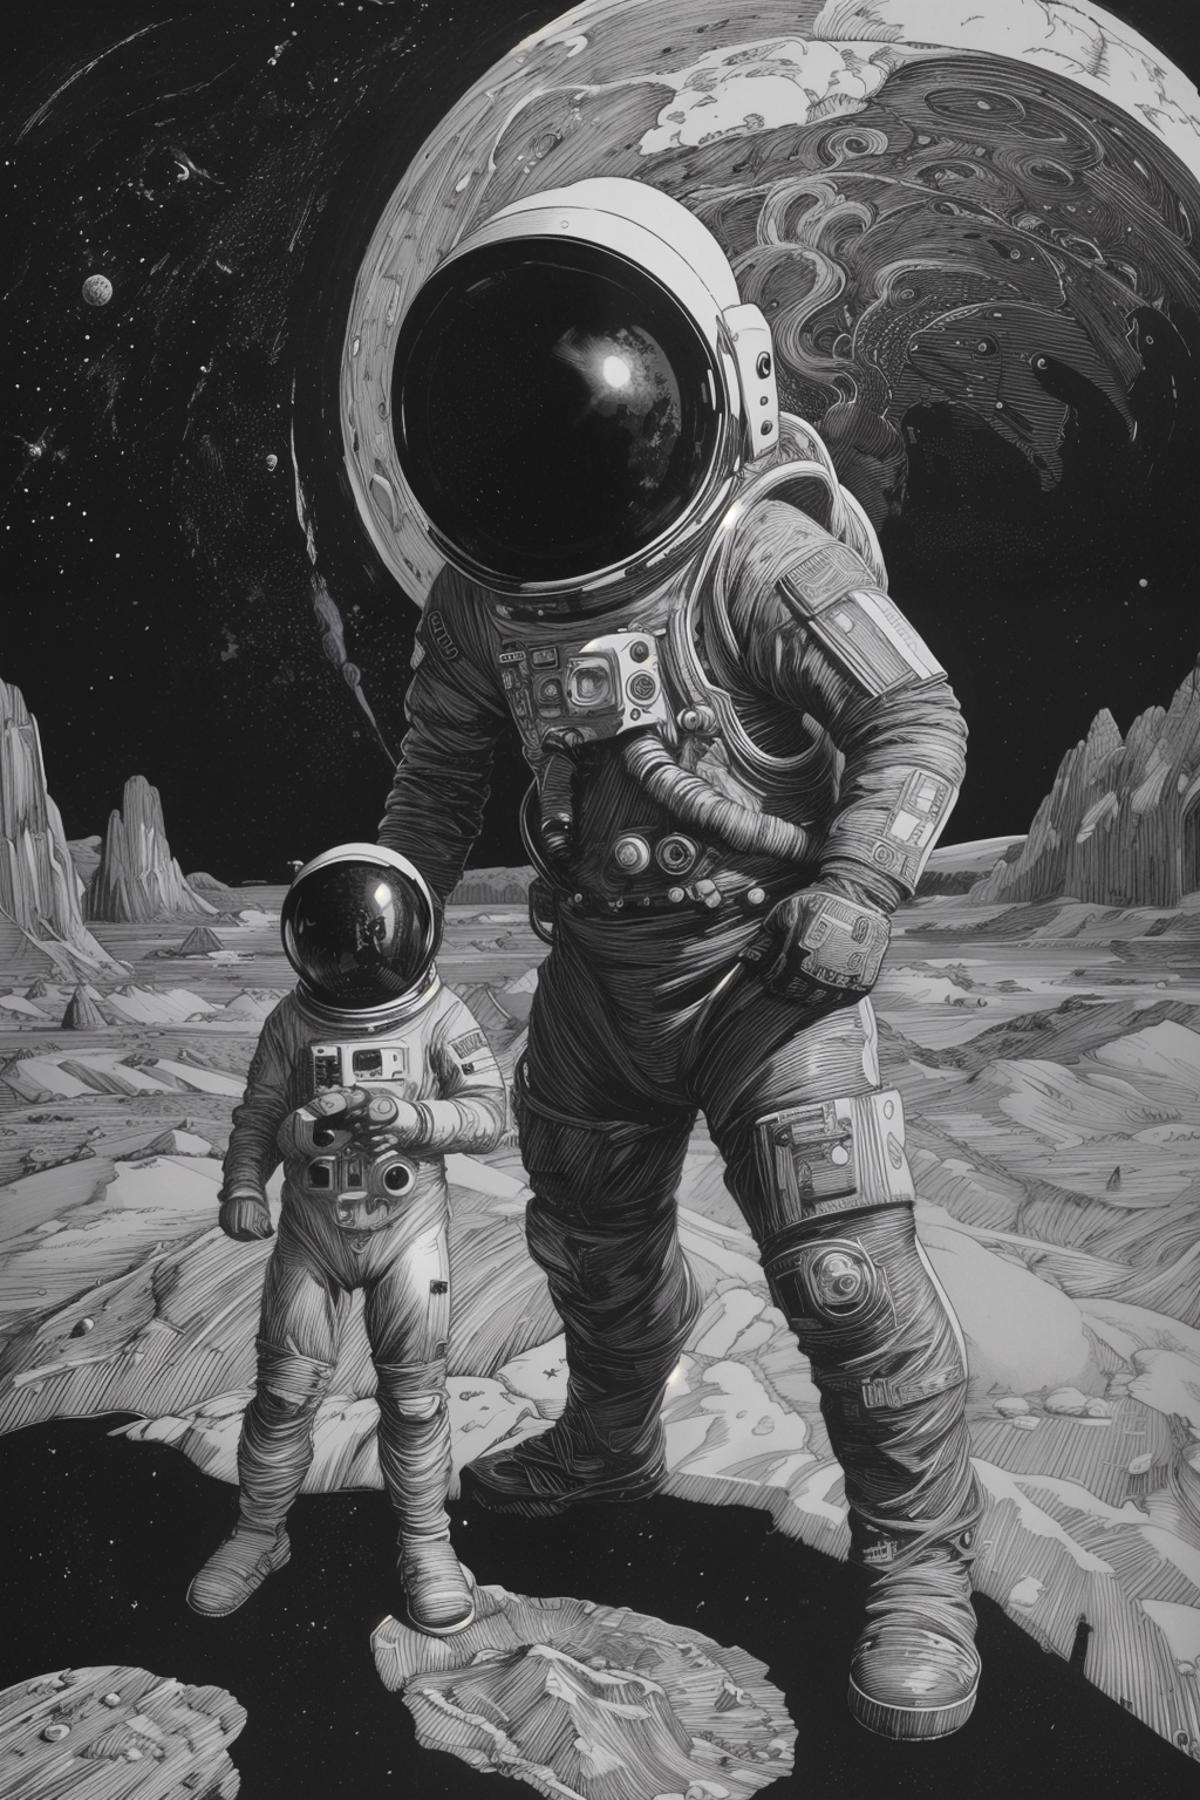 Astronaut and Spacesuit Drawing in Black and White, with a Space Shuttle in the Background